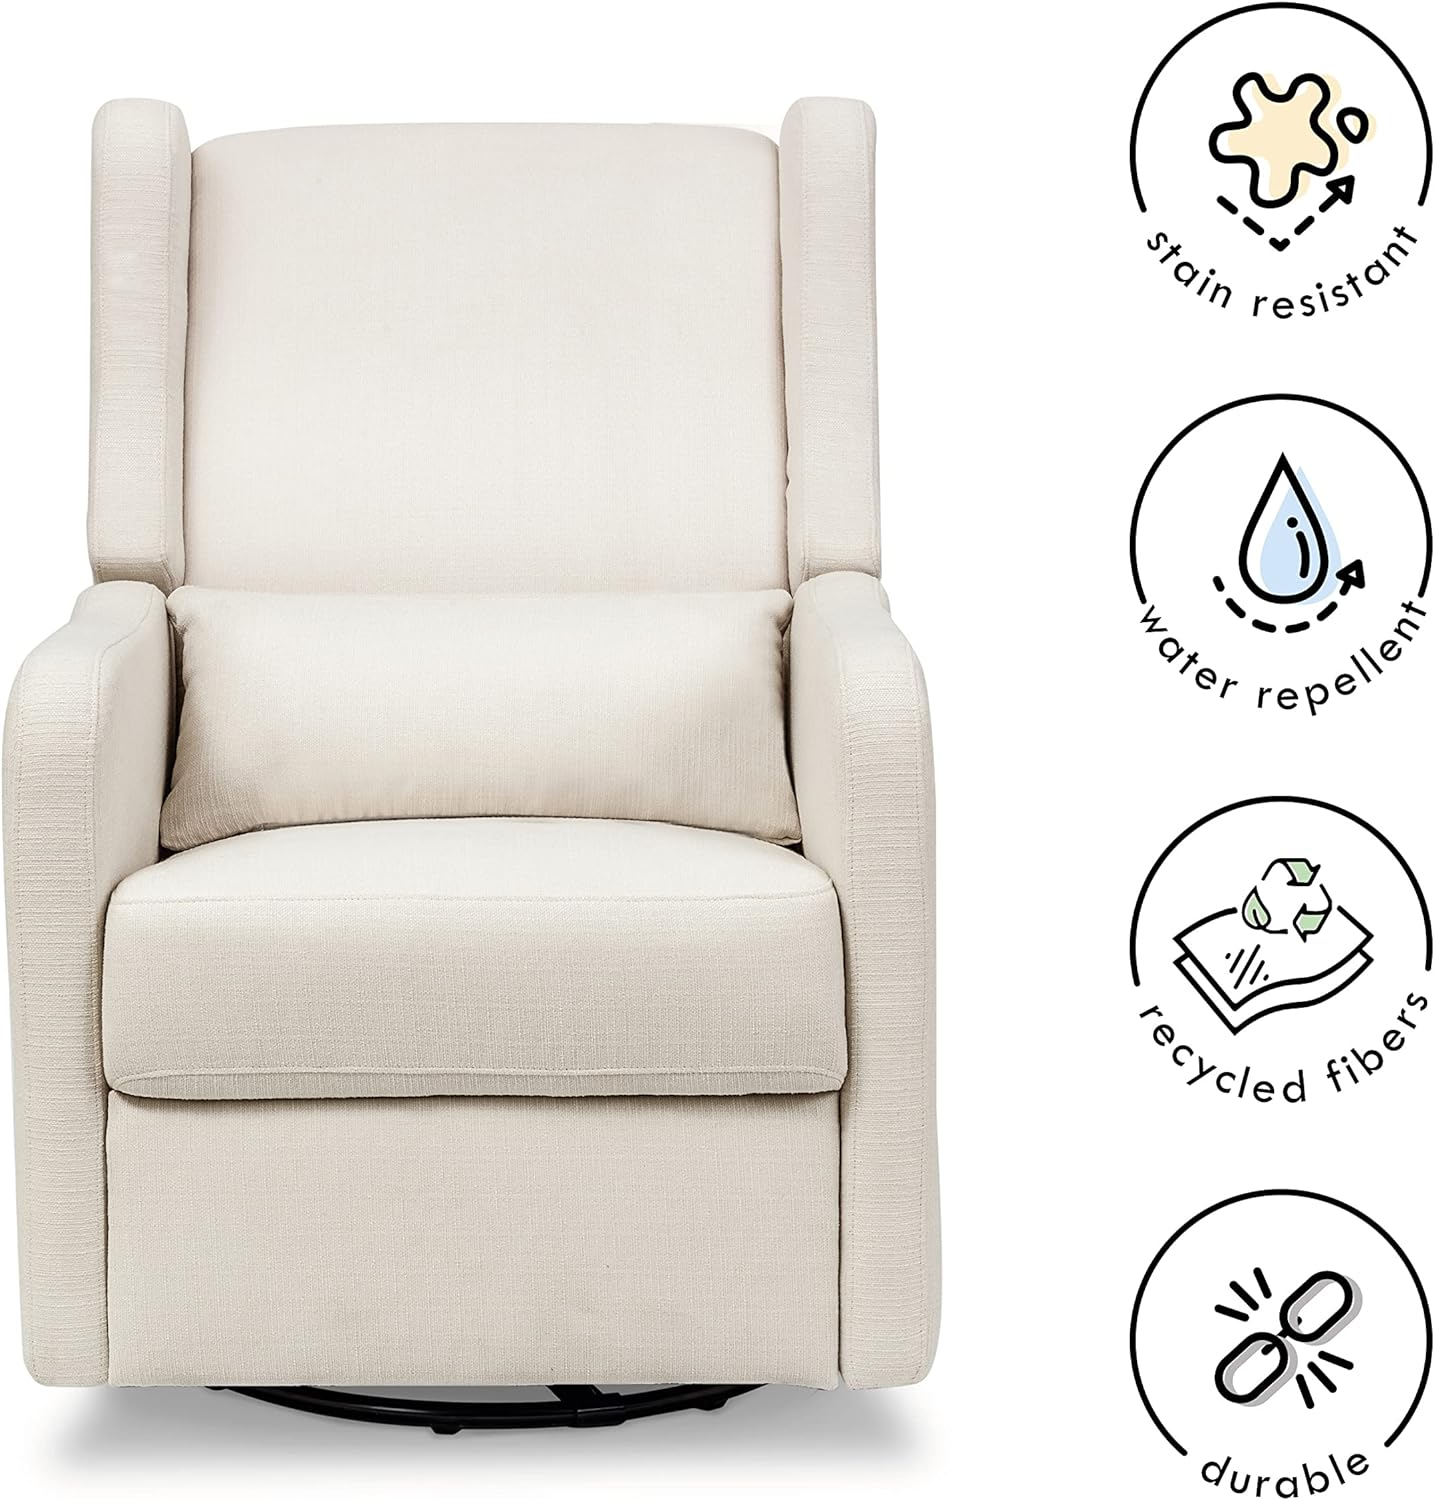 DaVinci Carter's Arlo Recliner and Swivel Glider, Water Repellent & Stain Resistant, Greenguard Gold & CertiPUR-US Certified, Performance Cream Linen